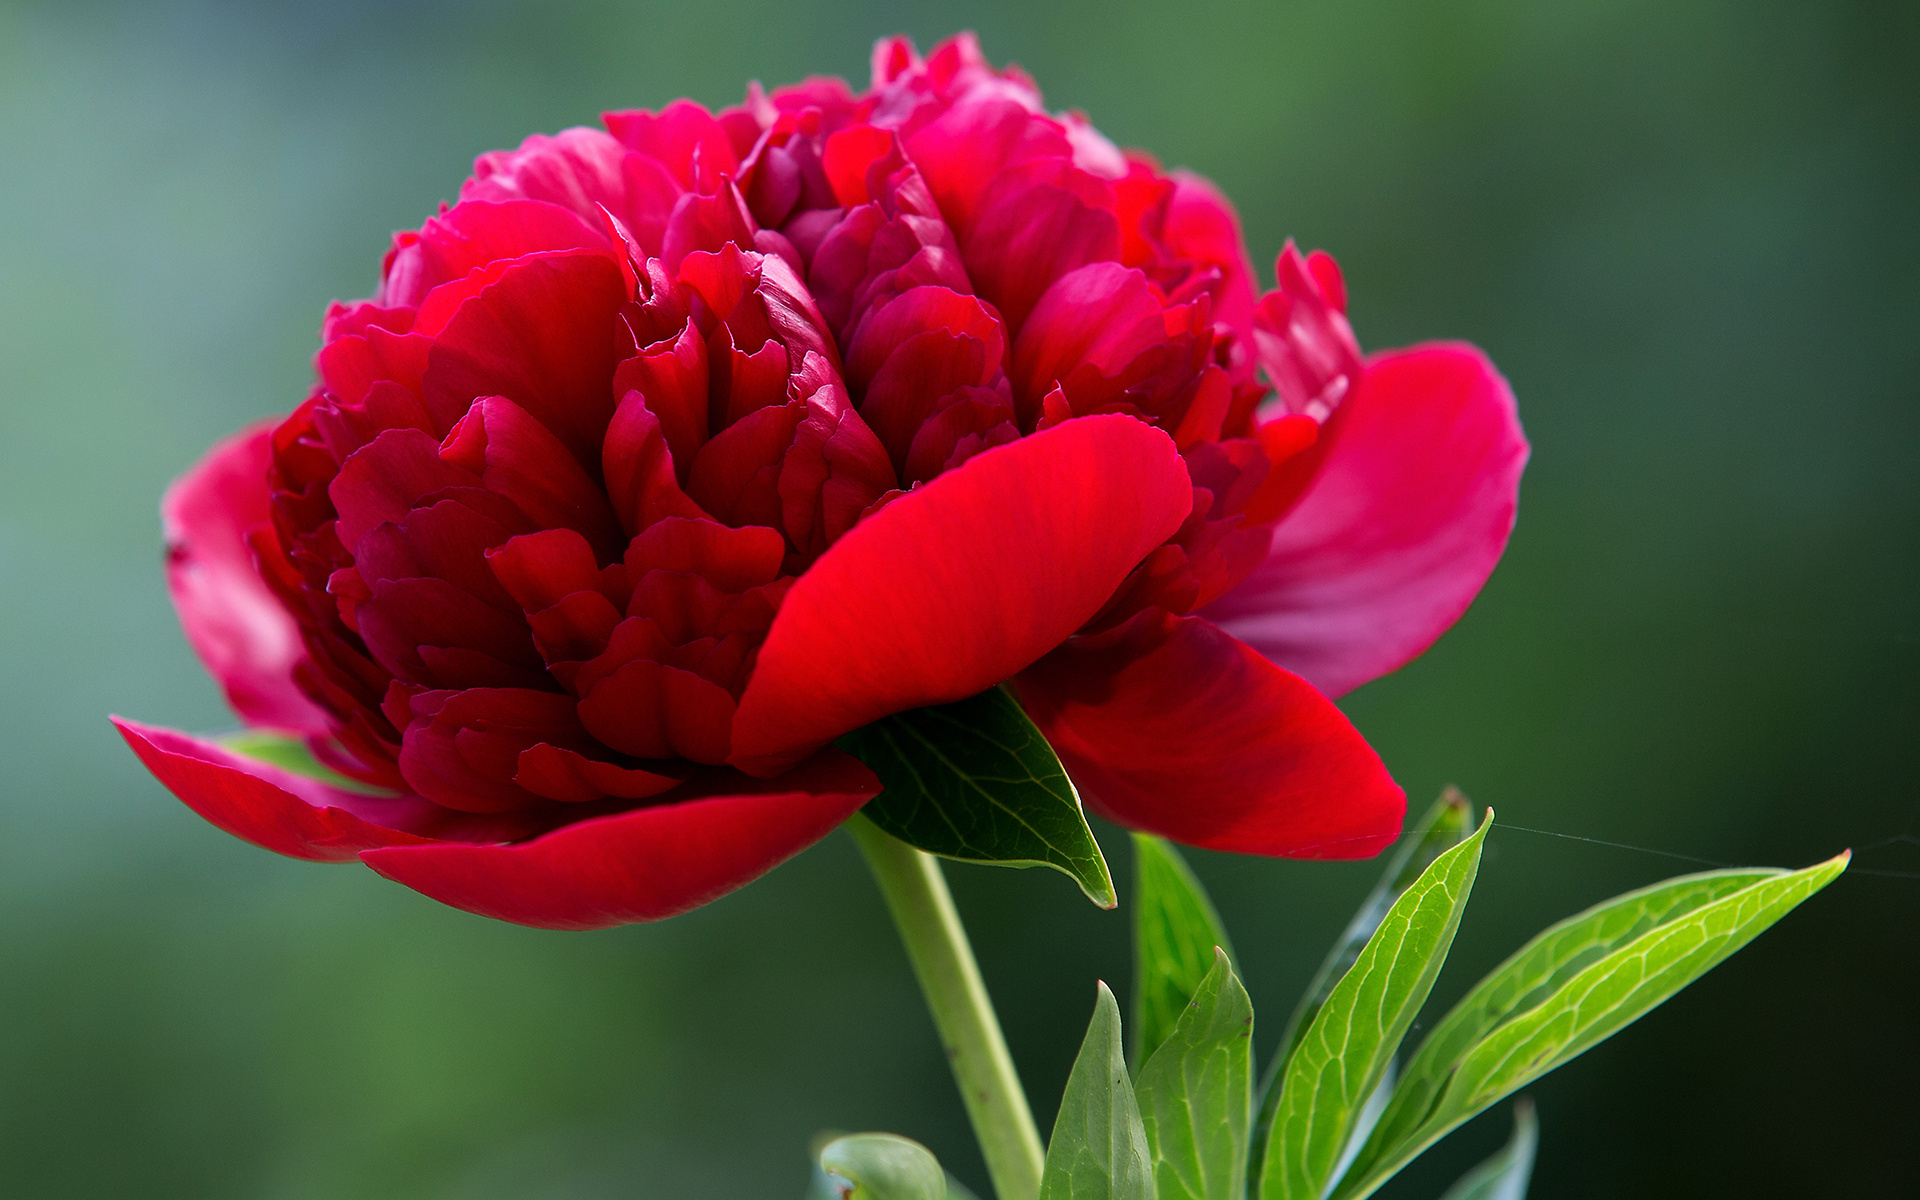 Earth Flower Peony Close Up Red Flower 1920x1200